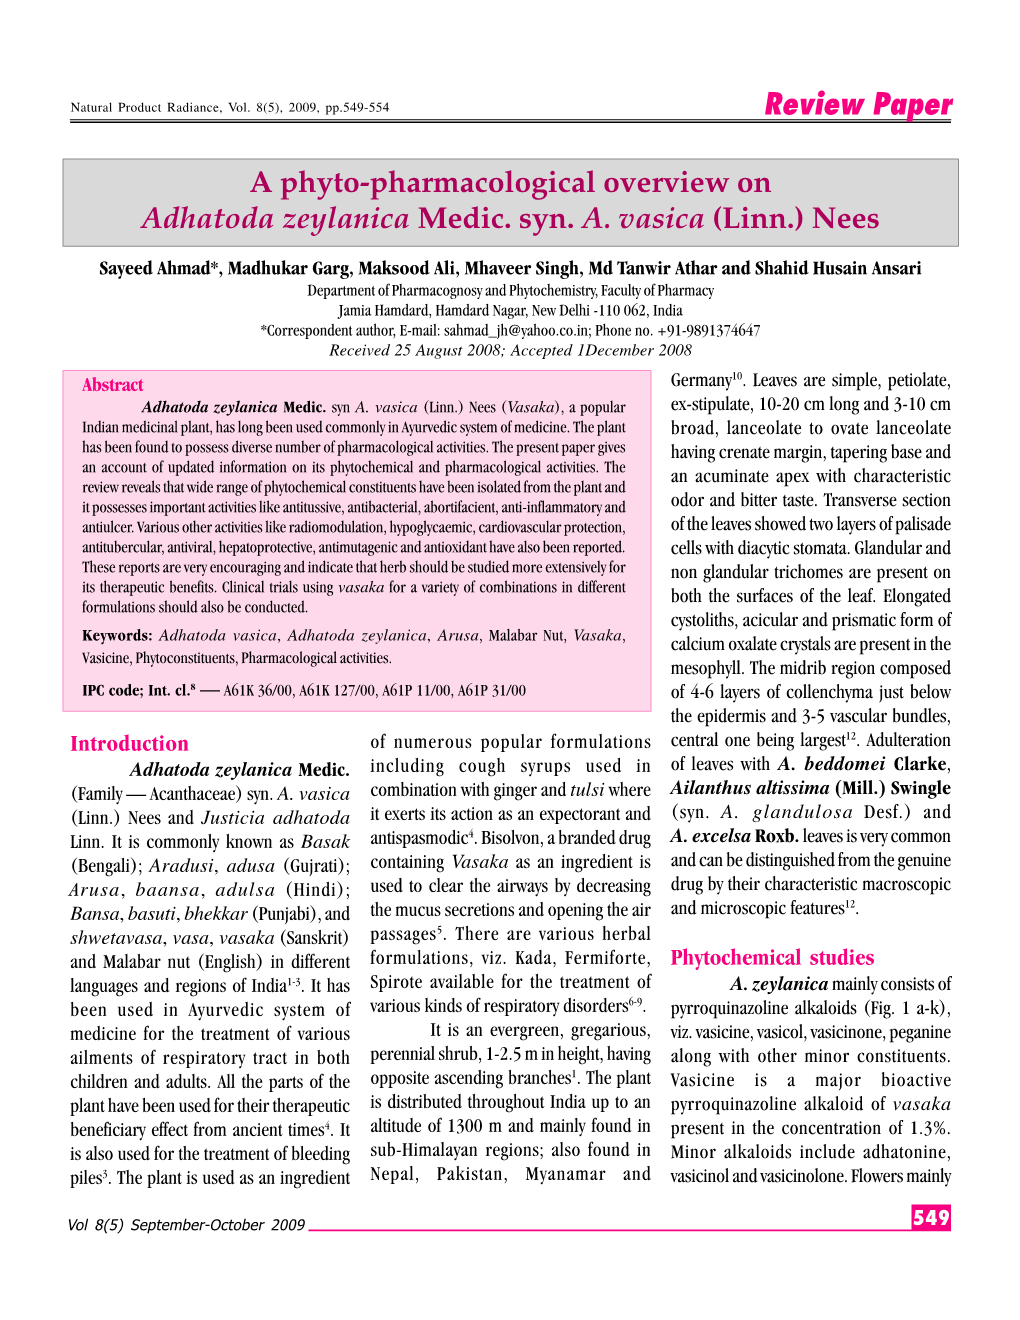 A Phyto-Pharmacological Overview on Adhatoda Vasica